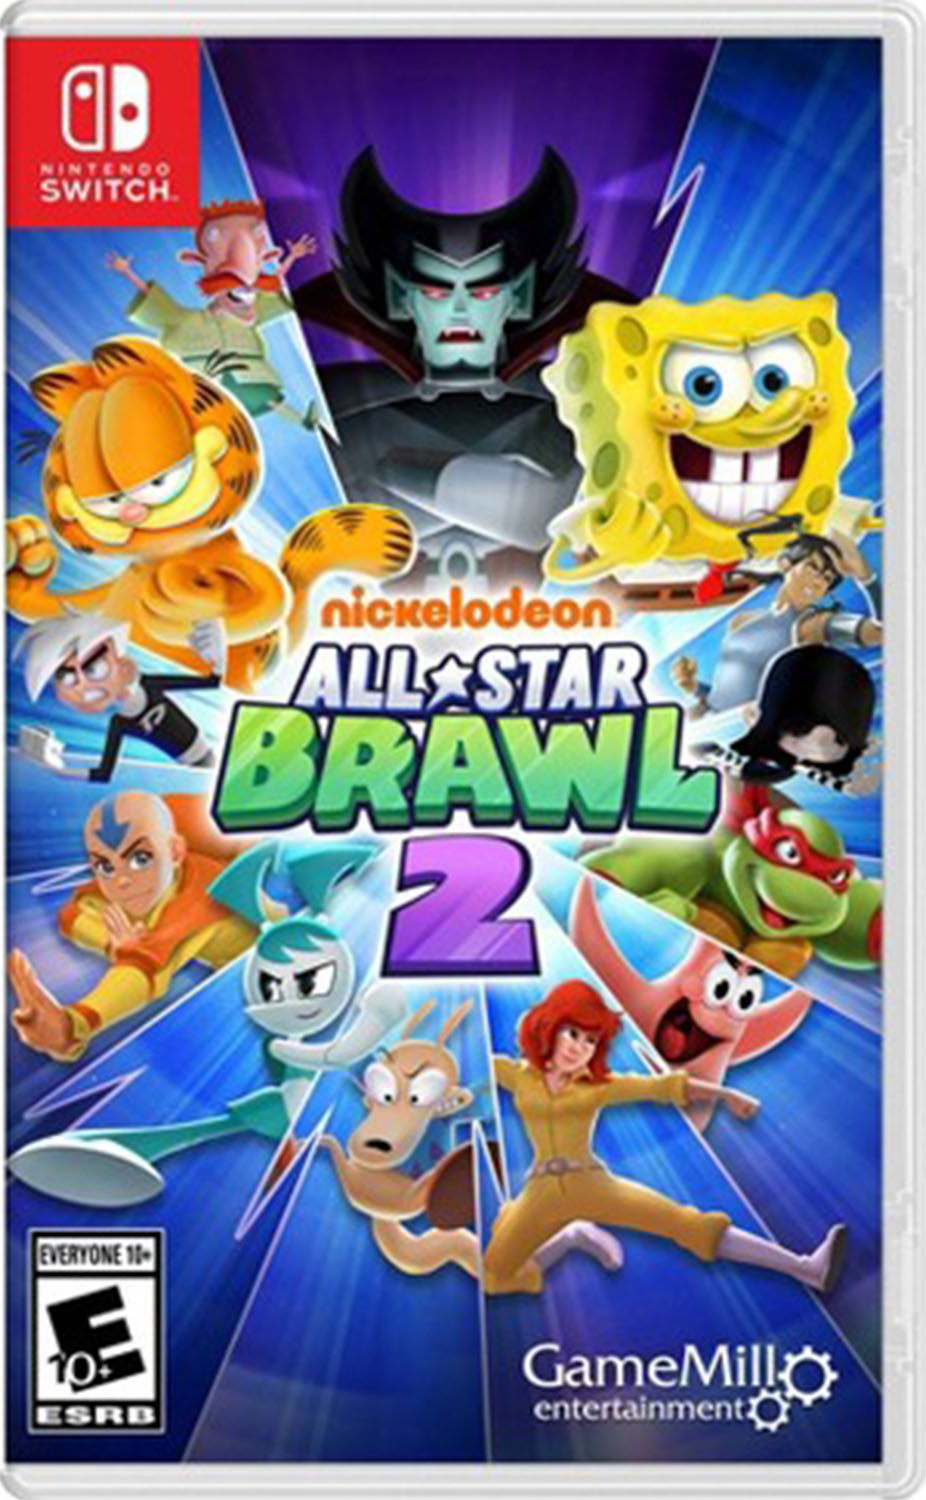 Cover of All Star Brawl with Nickelodeon characters popping out from behind title of game